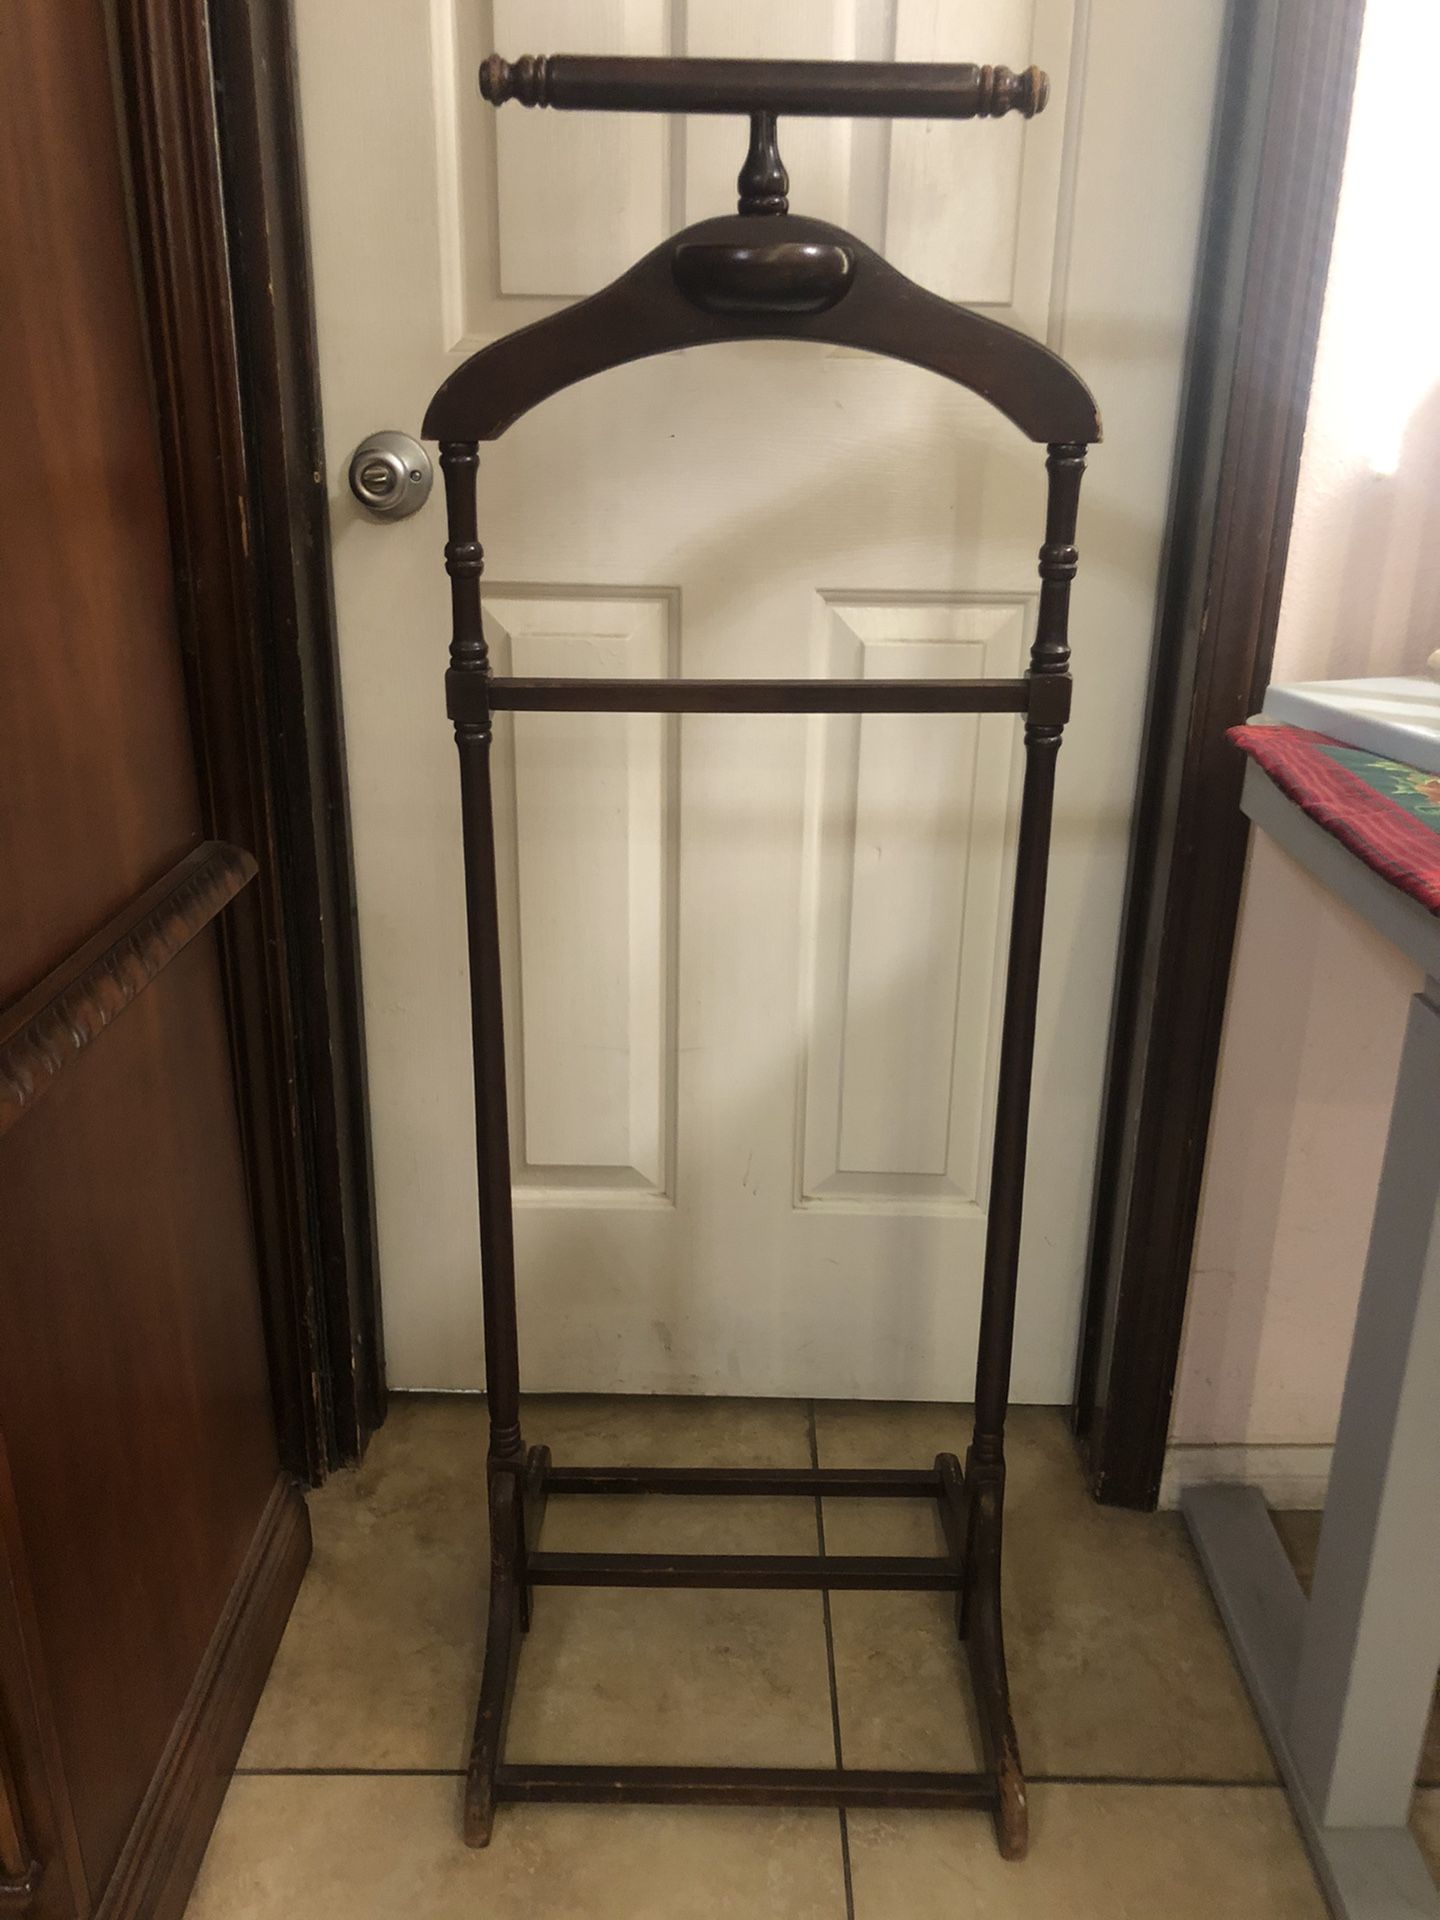 Antique wooden Clothes Hanger stand with with shoes bar, Bedroom Furniture/Men's valet stand